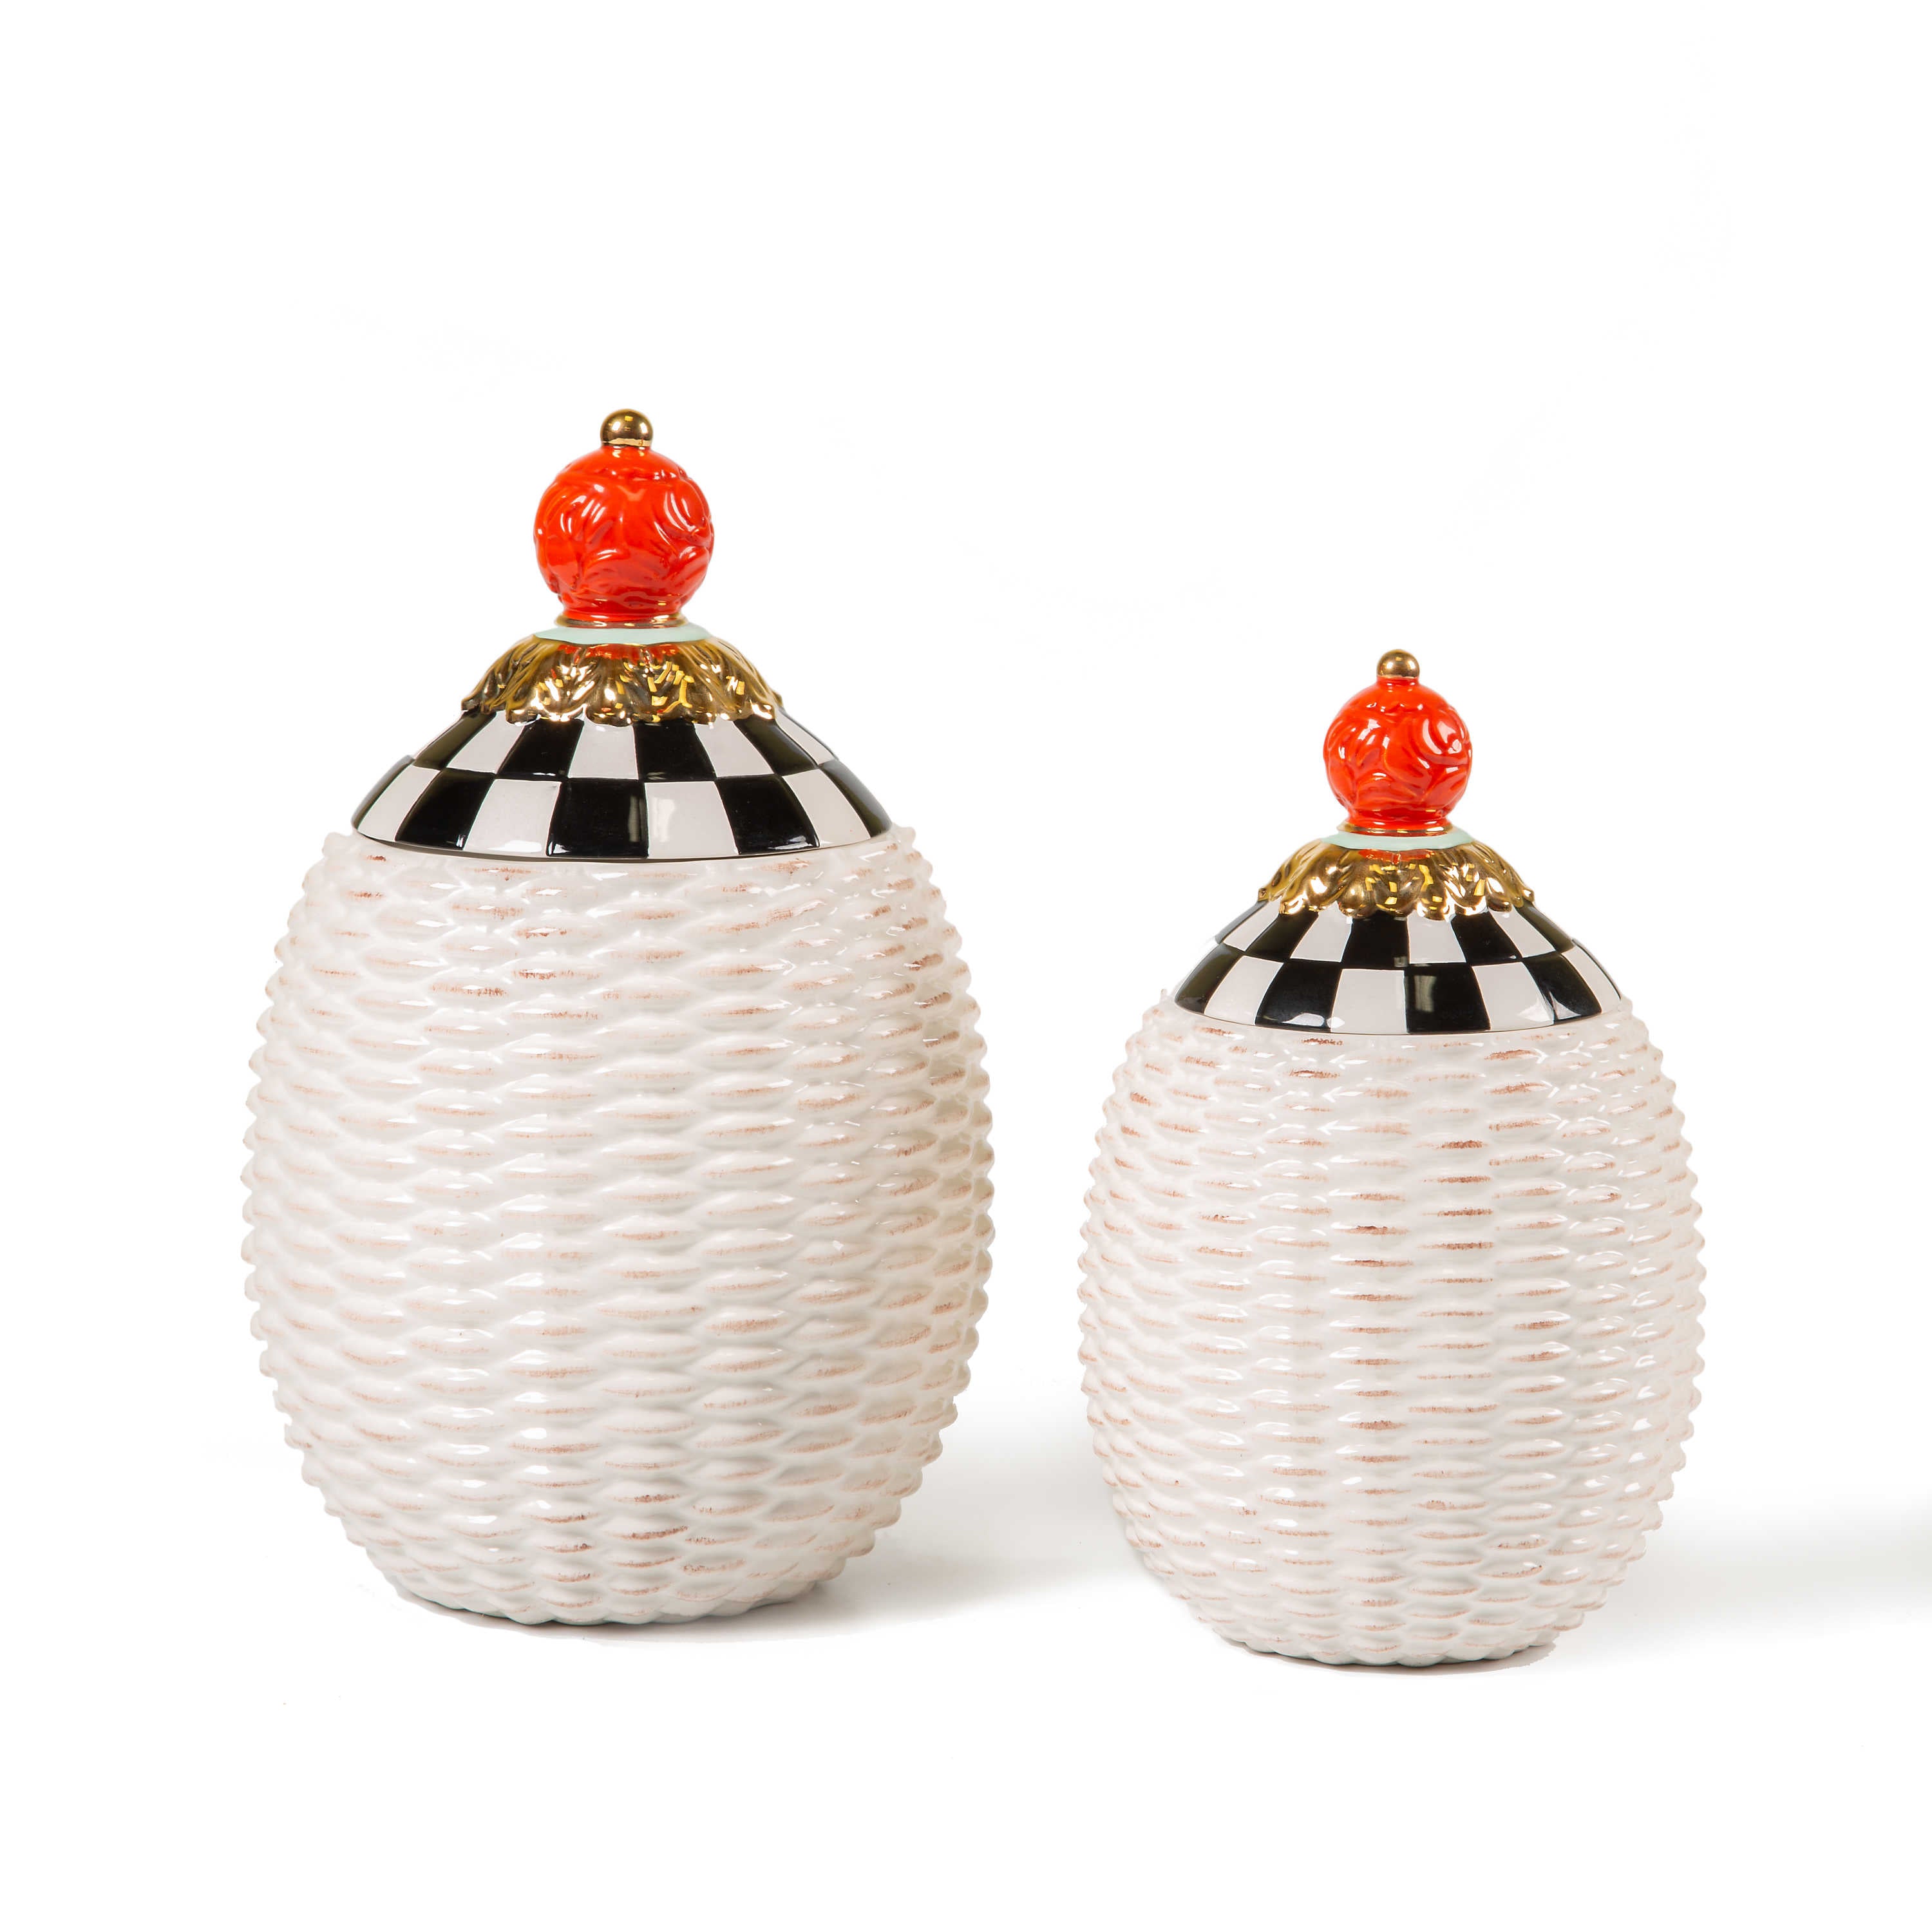 Courtly Basket Weave Canisters -Set of 2